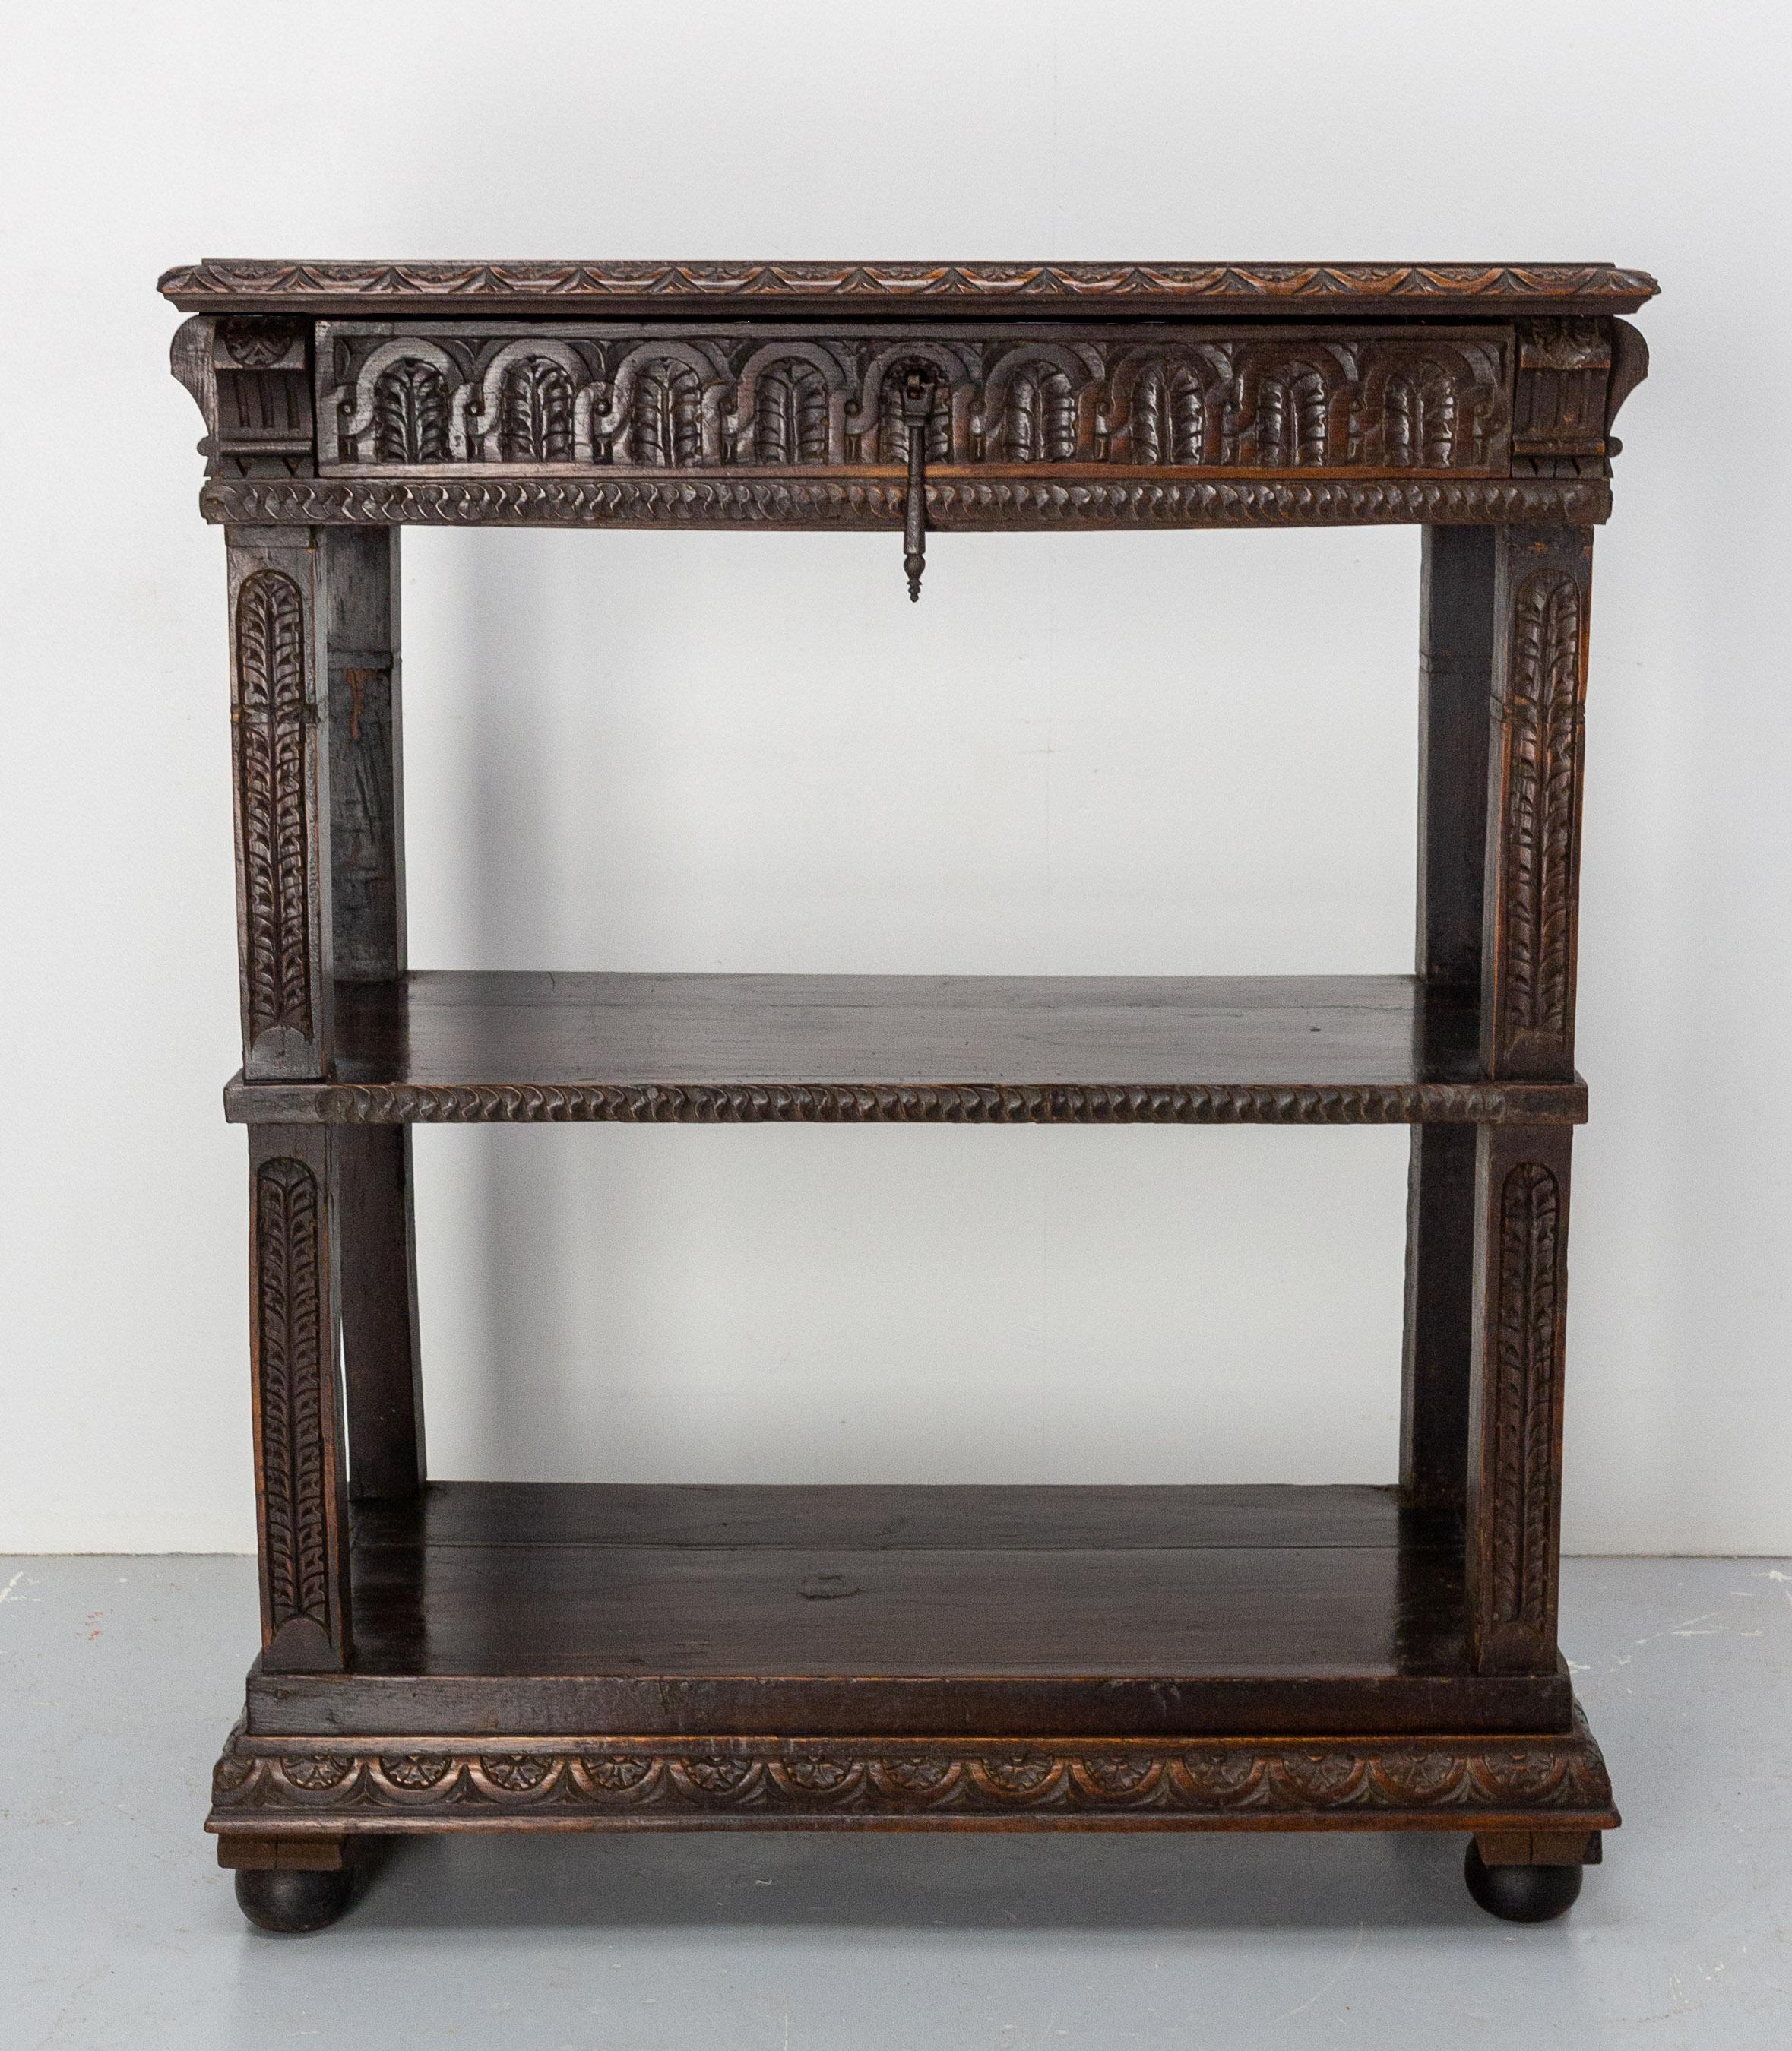 Spanish hall side or console table.
Handsome and practical.
Spanish Colonial revival, circa 1890
Twisted carved legs.
Good condition.

Shipping: 
L81 P41 H96 21 Kg.